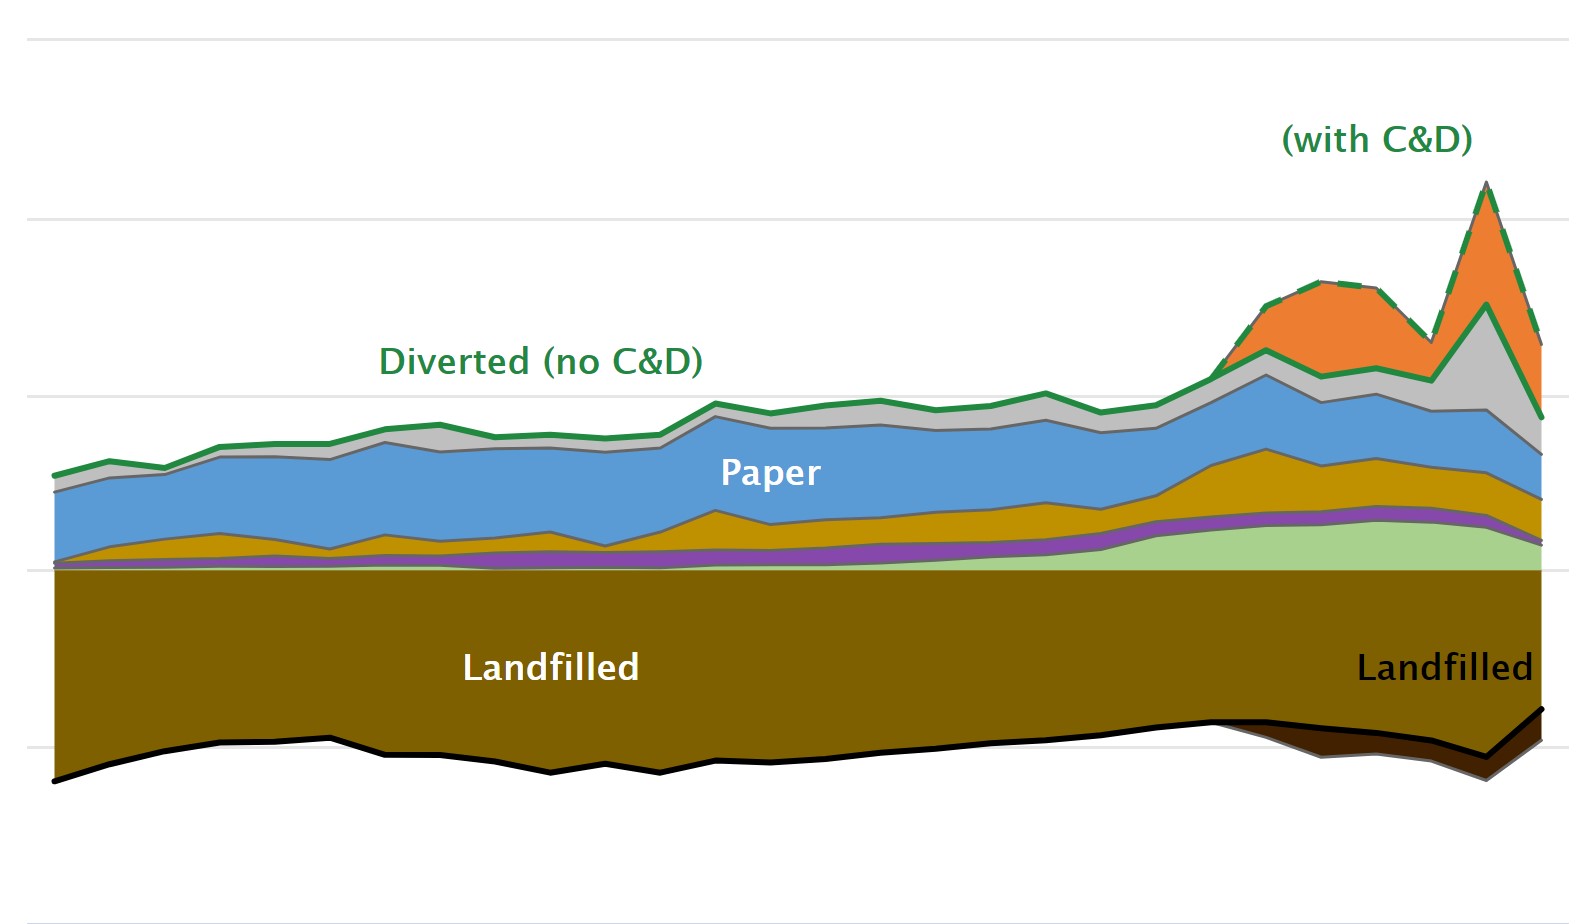 Line graph showing the number of tons of waste the University of Oregon has sent to landfill versus diverted since 1992